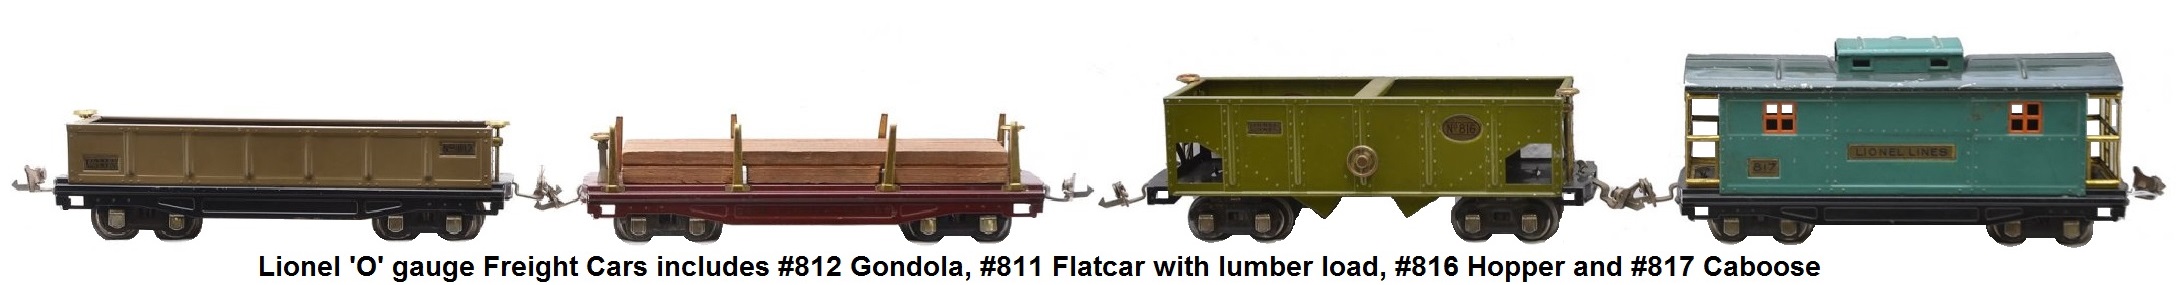 Lionel 'O' gauge freight cars with brass trim and nickel journals including #811 maroon flatcar with lumber load, #812 Mojave gondola, #816 olive green hopper and #817 two-tone green caboose